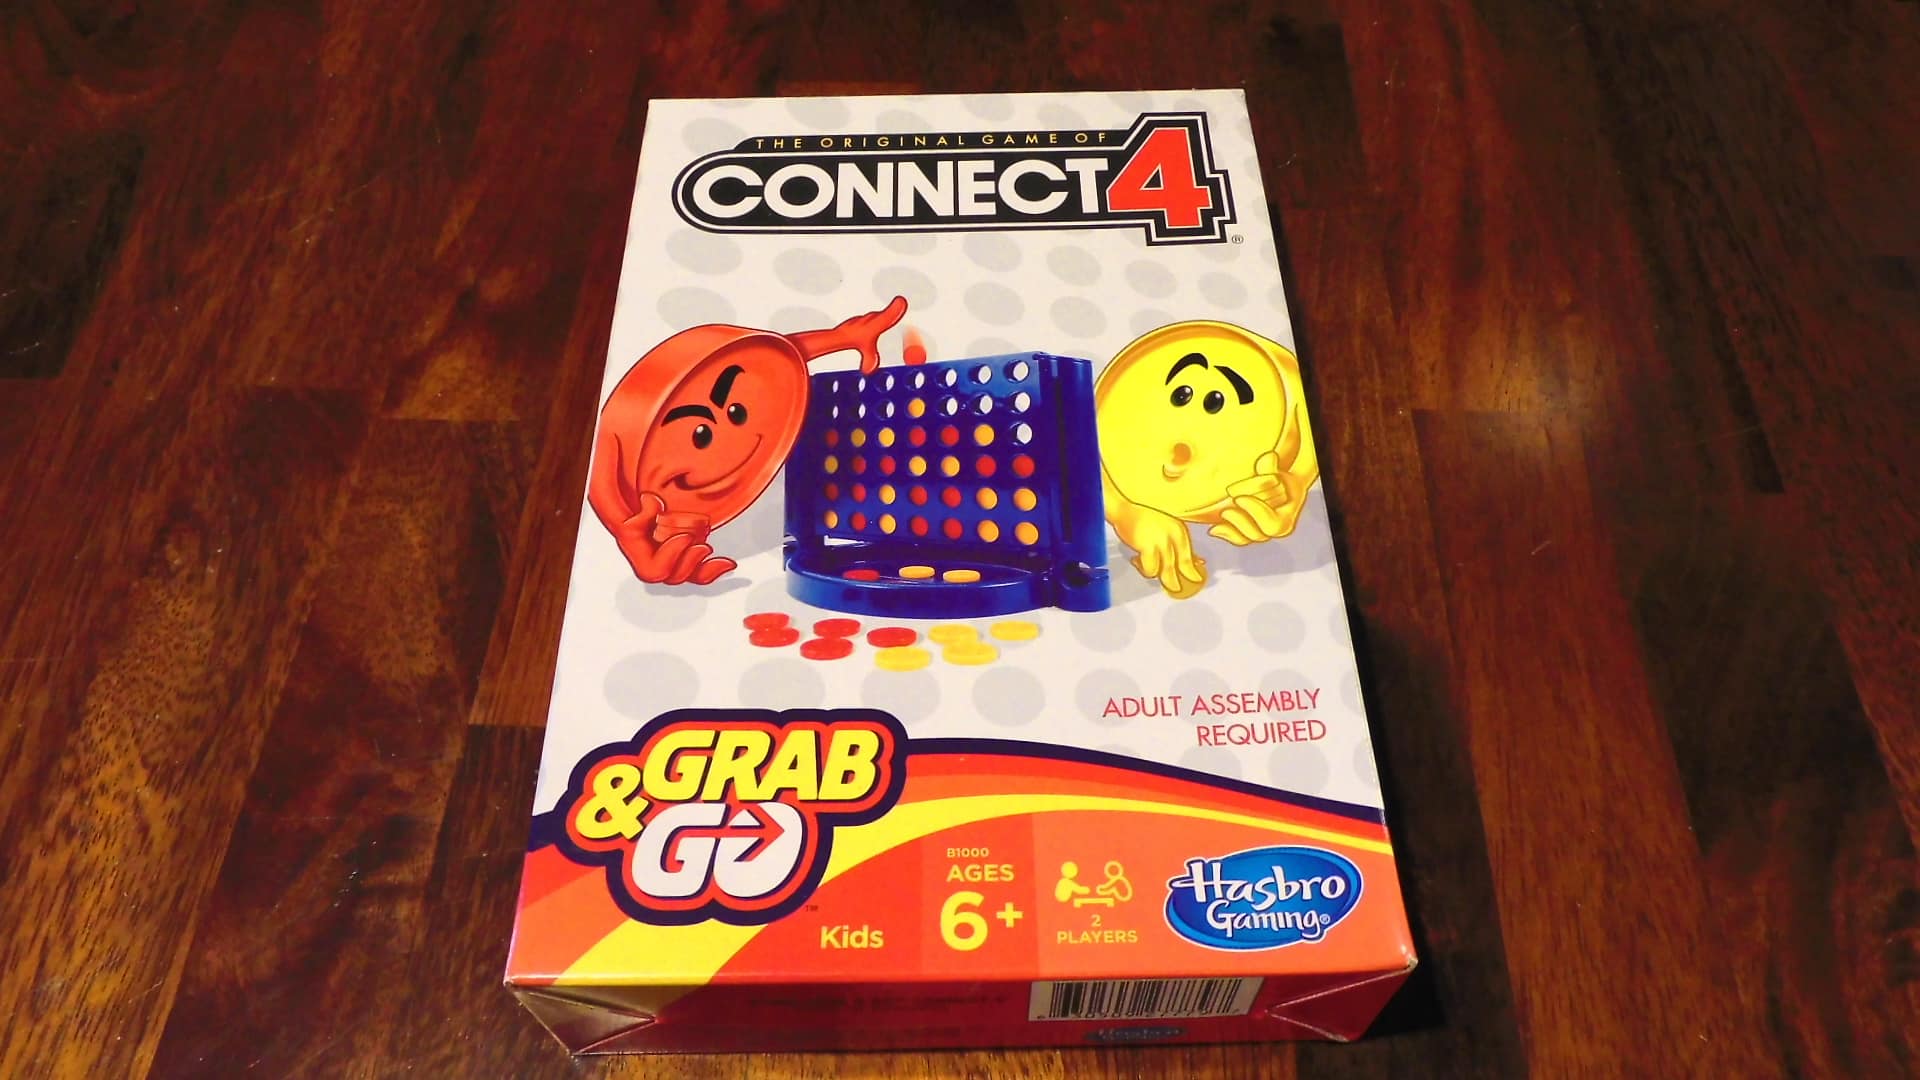 Should You Consider Connect 4 Grab & Go When Traveling?